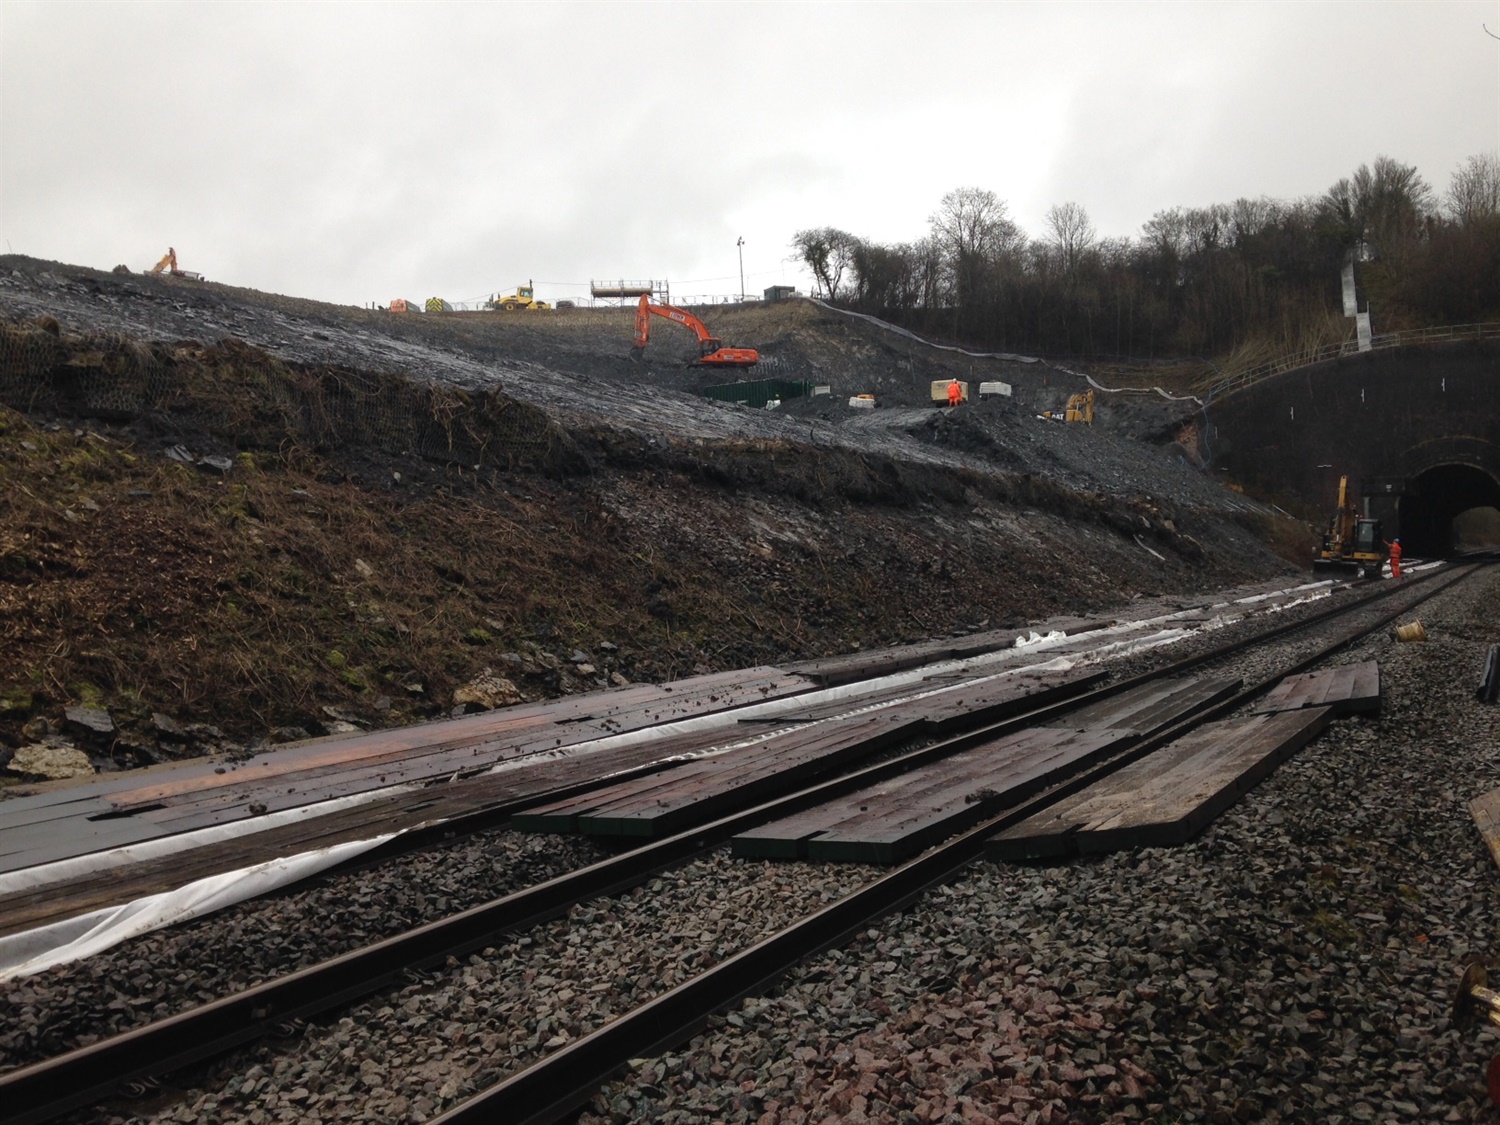 harbury landslip from track level, March 15